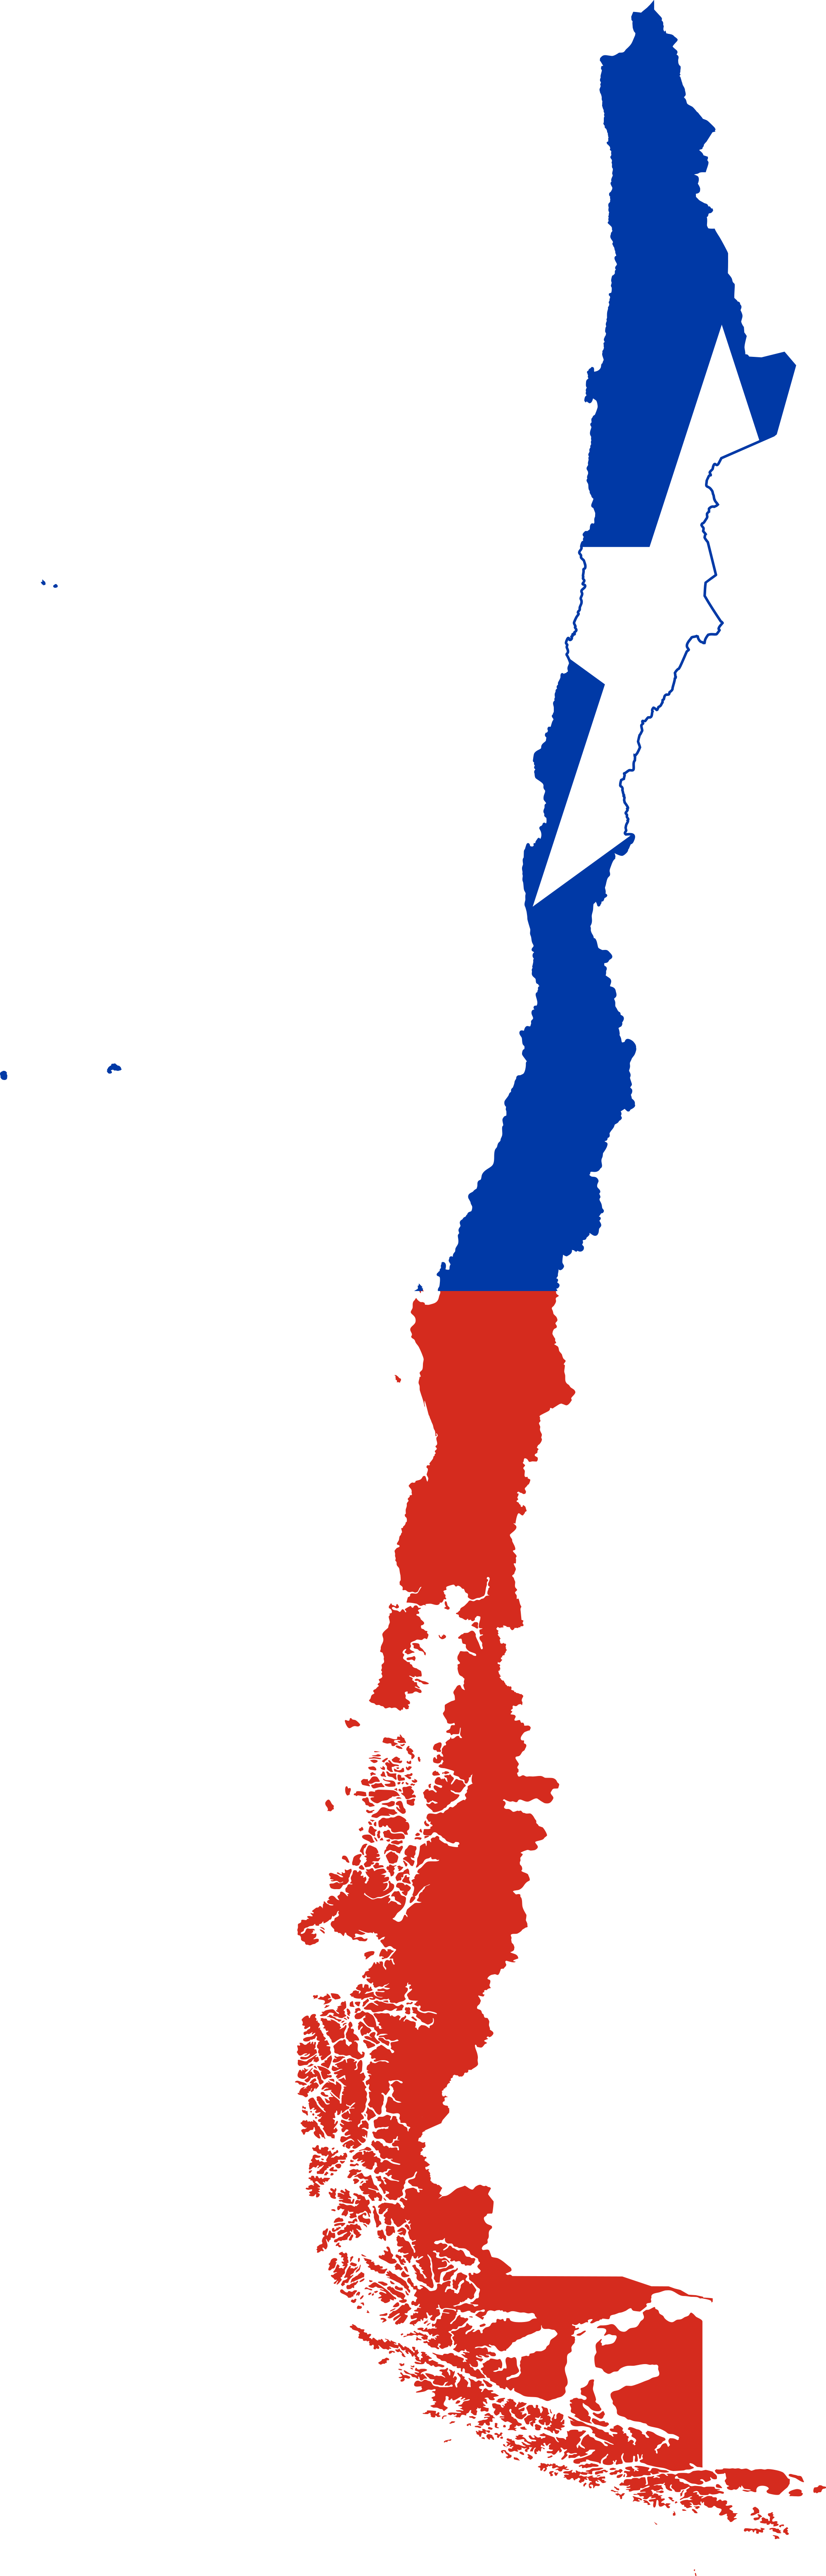 A Map Of Chile With A Flag